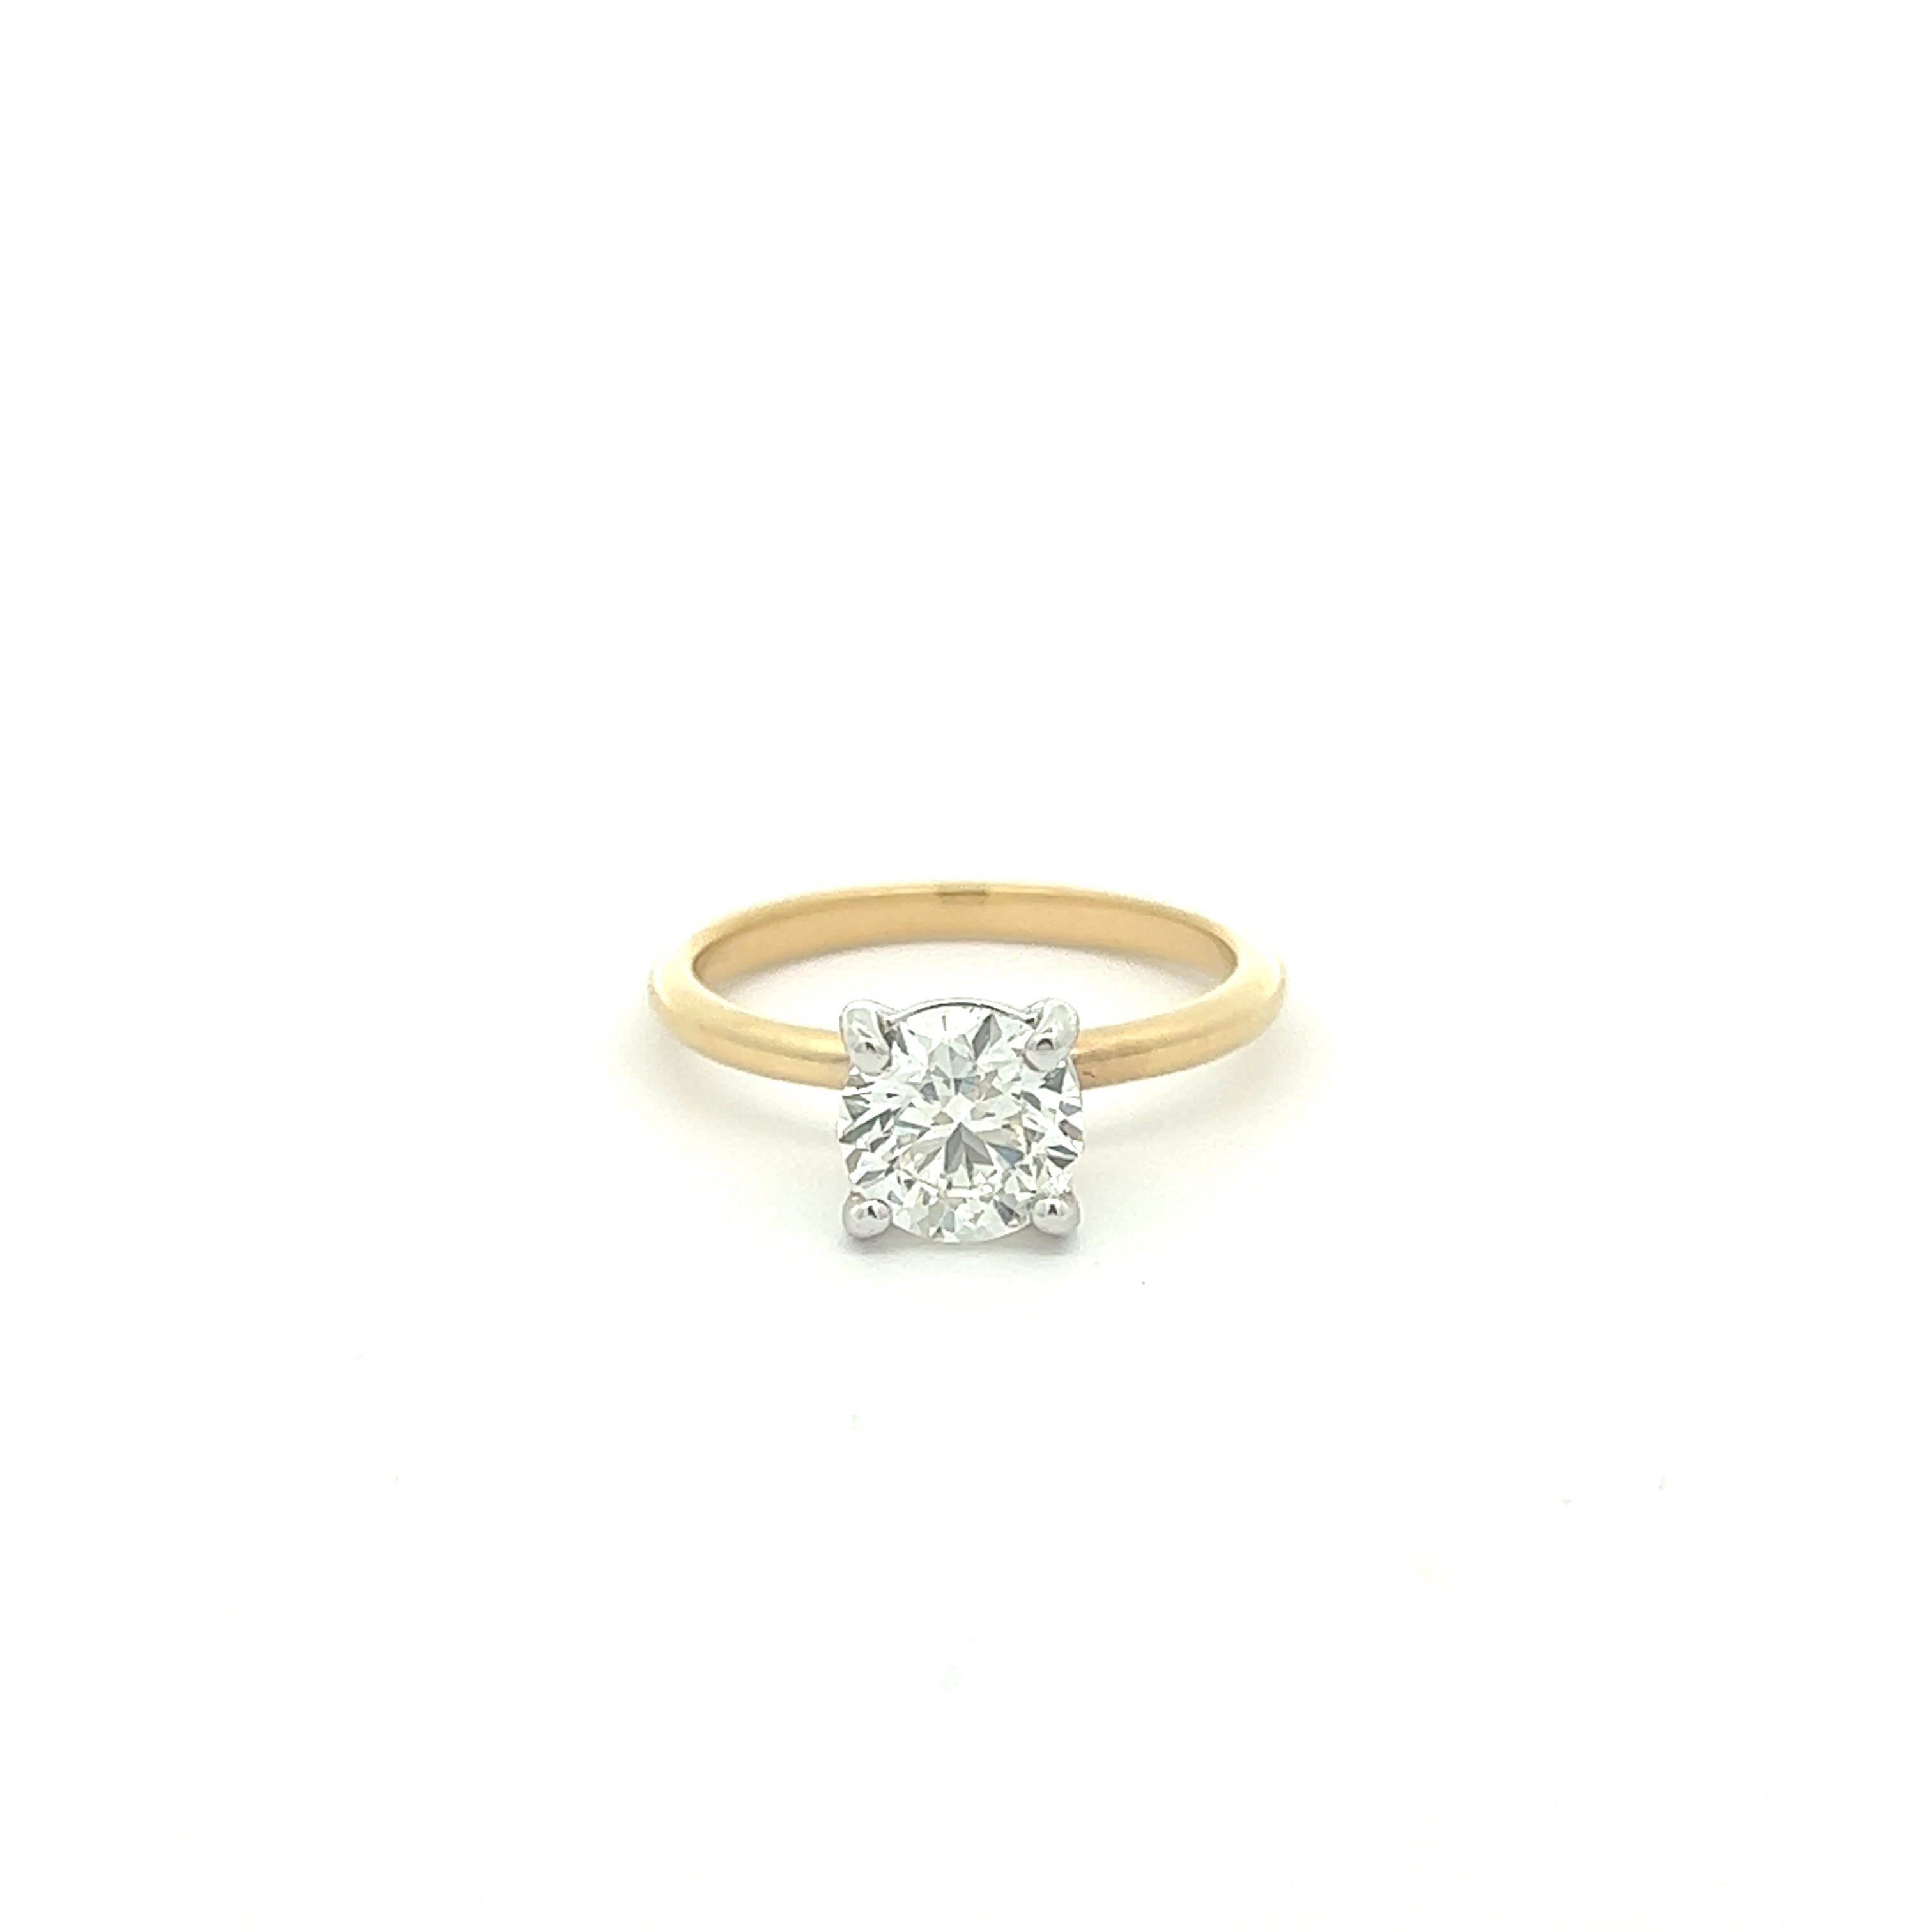 The 1974 18K Yellow Gold Round Engagement Ring